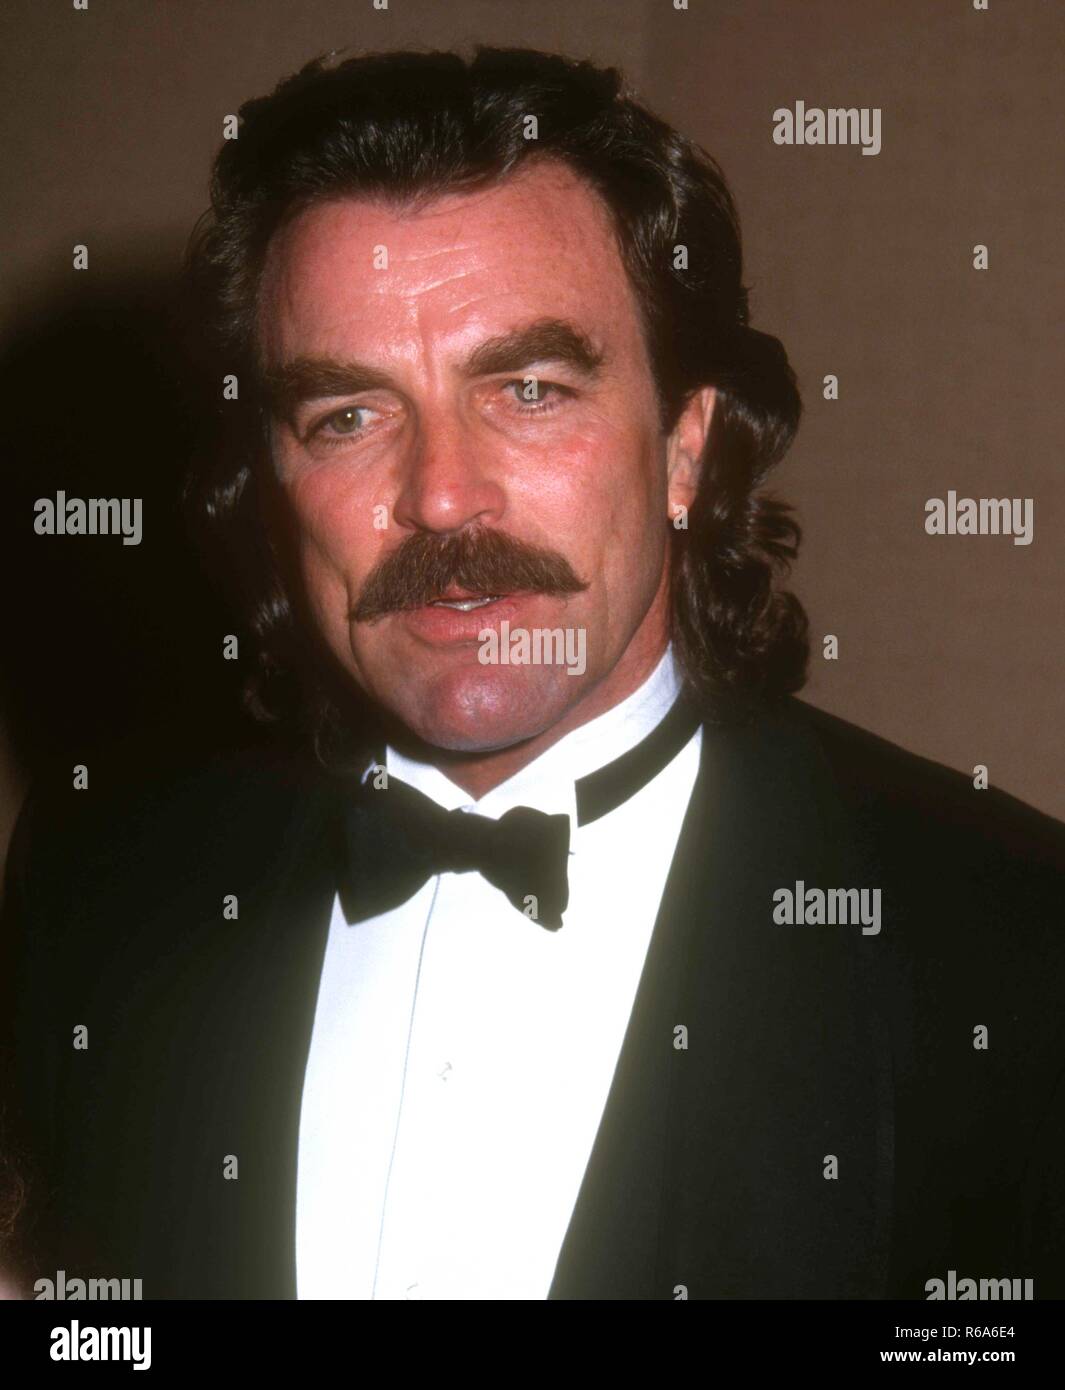 BEVERLY HILLS, CA - MARCH 21: Actor Tom Selleck attends Ceremony as ...